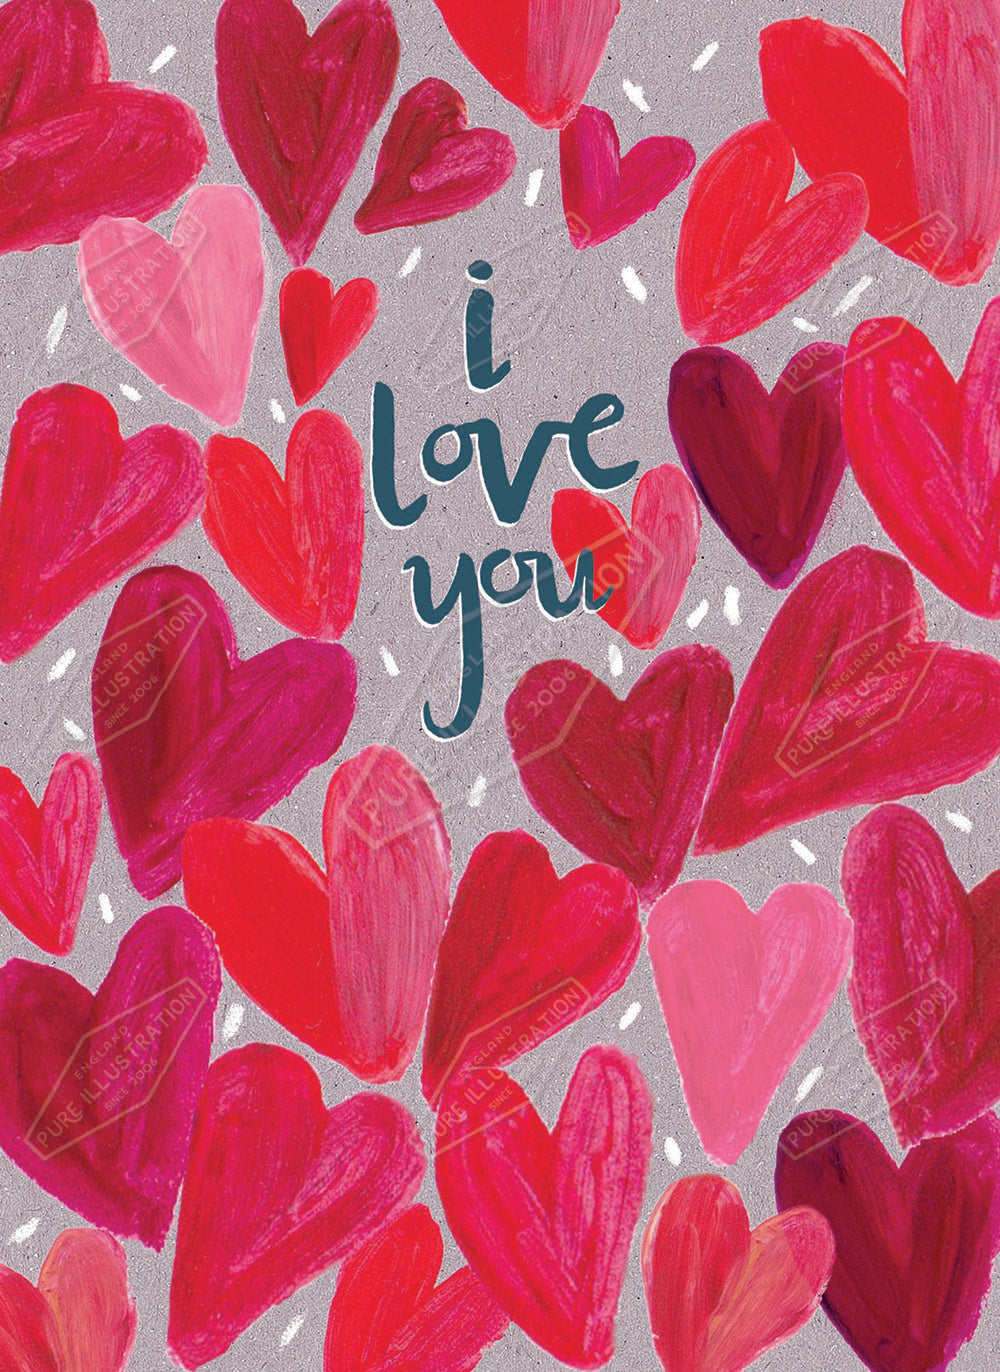 00033906SLA- Sarah Lake is represented by Pure Art Licensing Agency - Valentine's Day Greeting Card Design